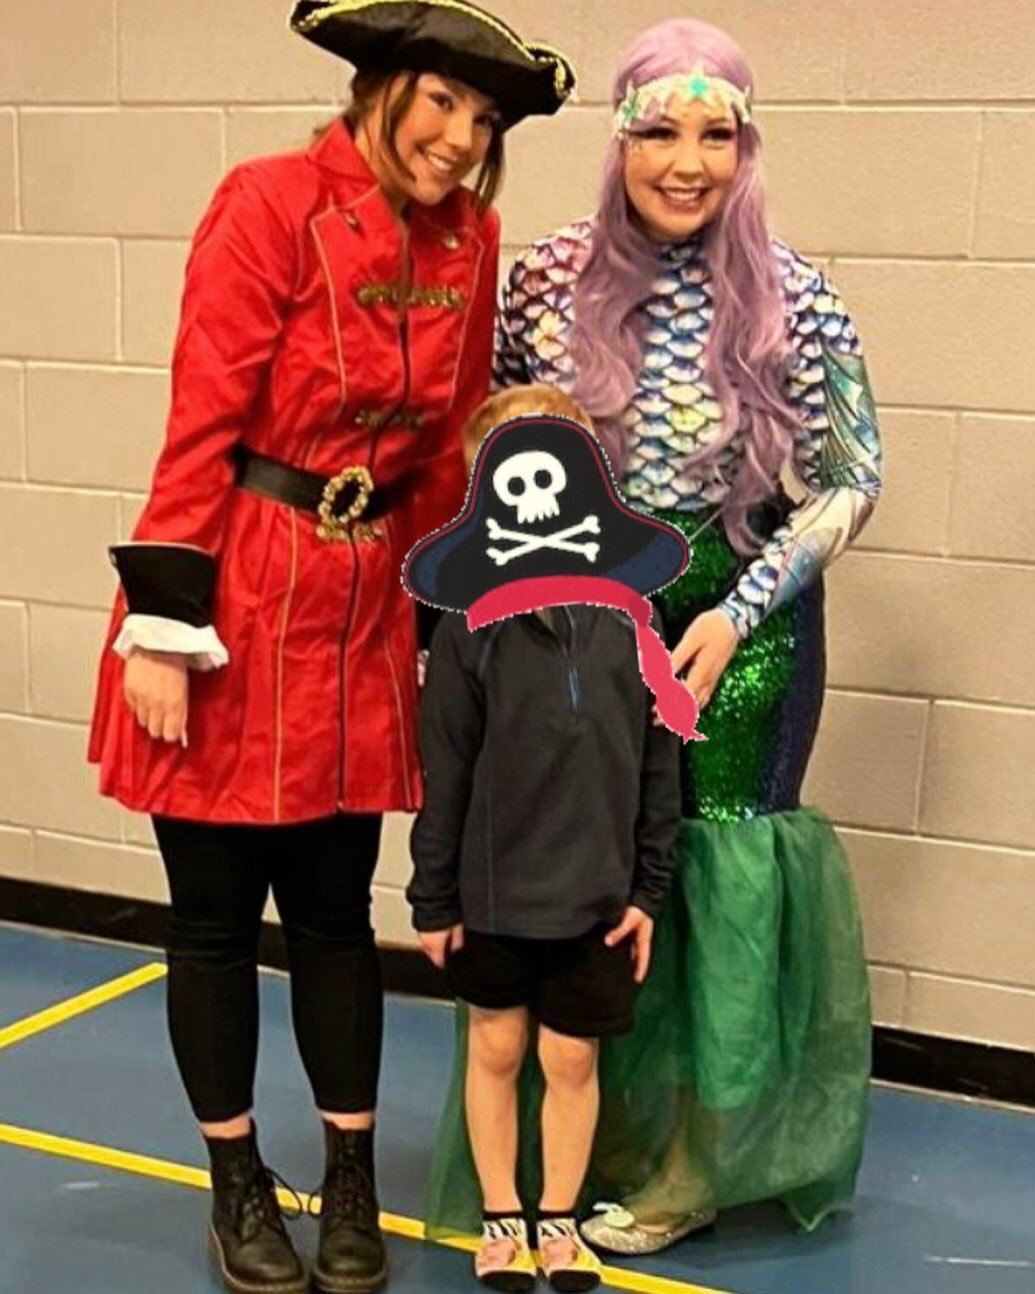 Ahoy there! We now offer PIRATE AND MERMAID parties. Have a pirate, a mermaid or BOTH. So much fun for everyone! 🧜🏻&zwj;♀️🏴&zwj;☠️